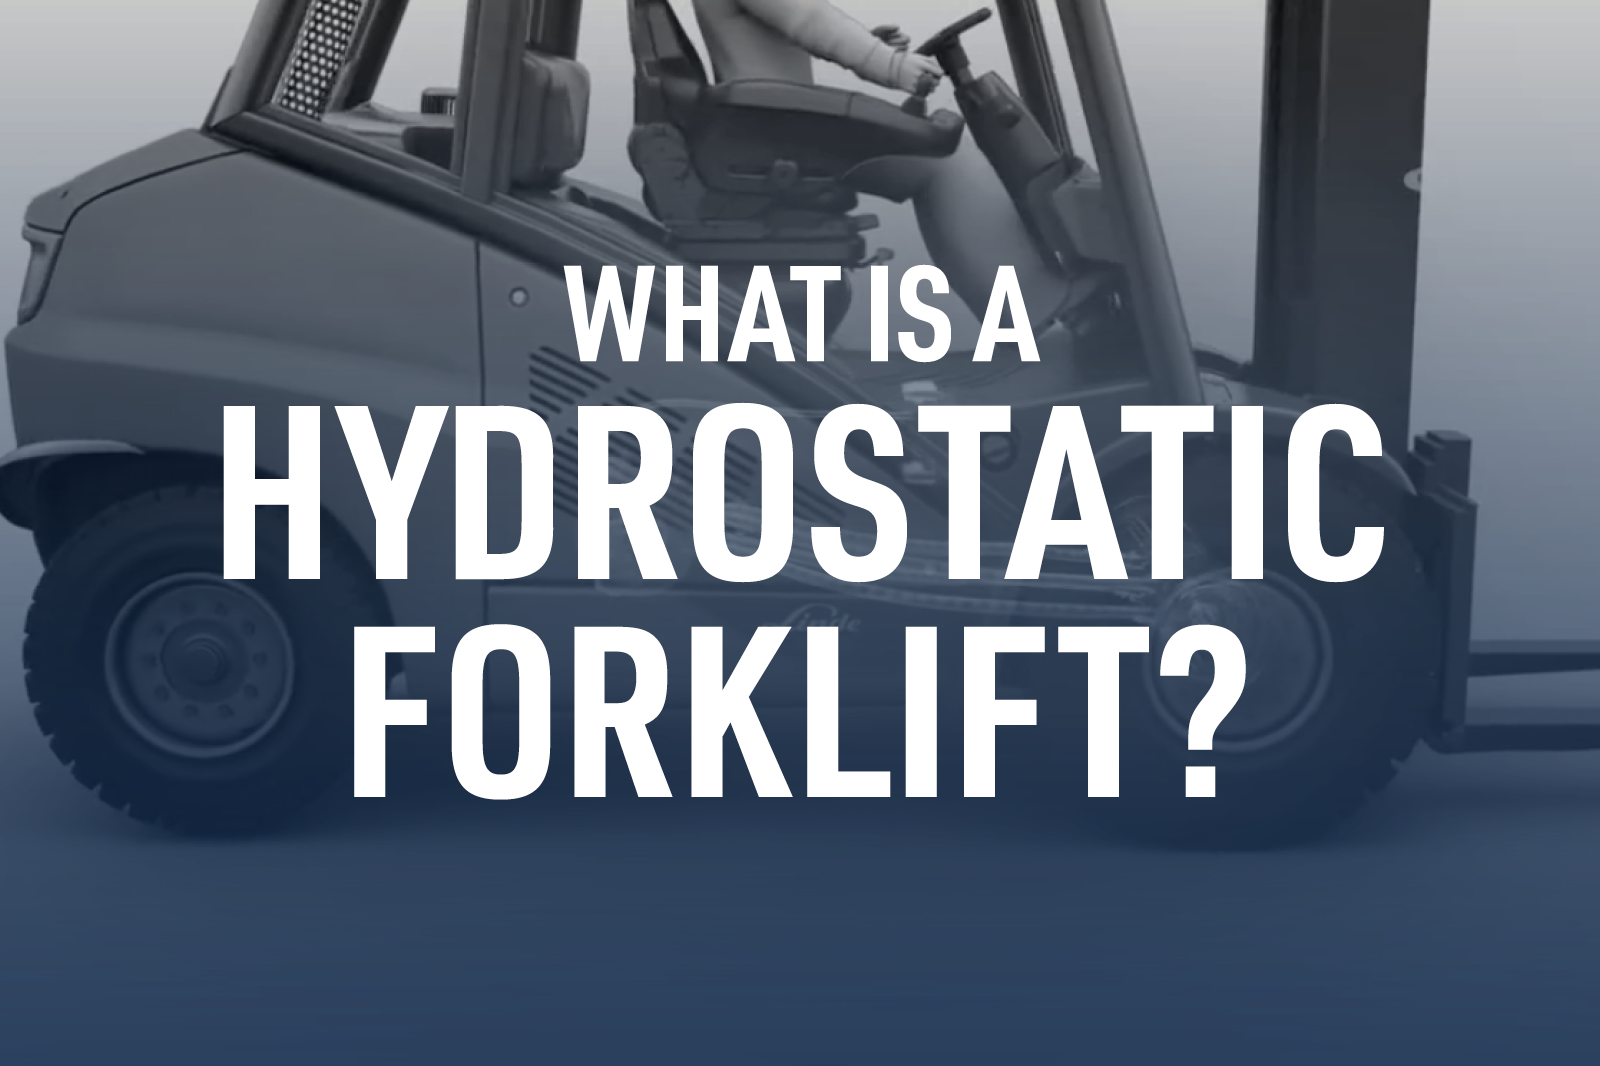 What is a Hydrostatic Forklift?